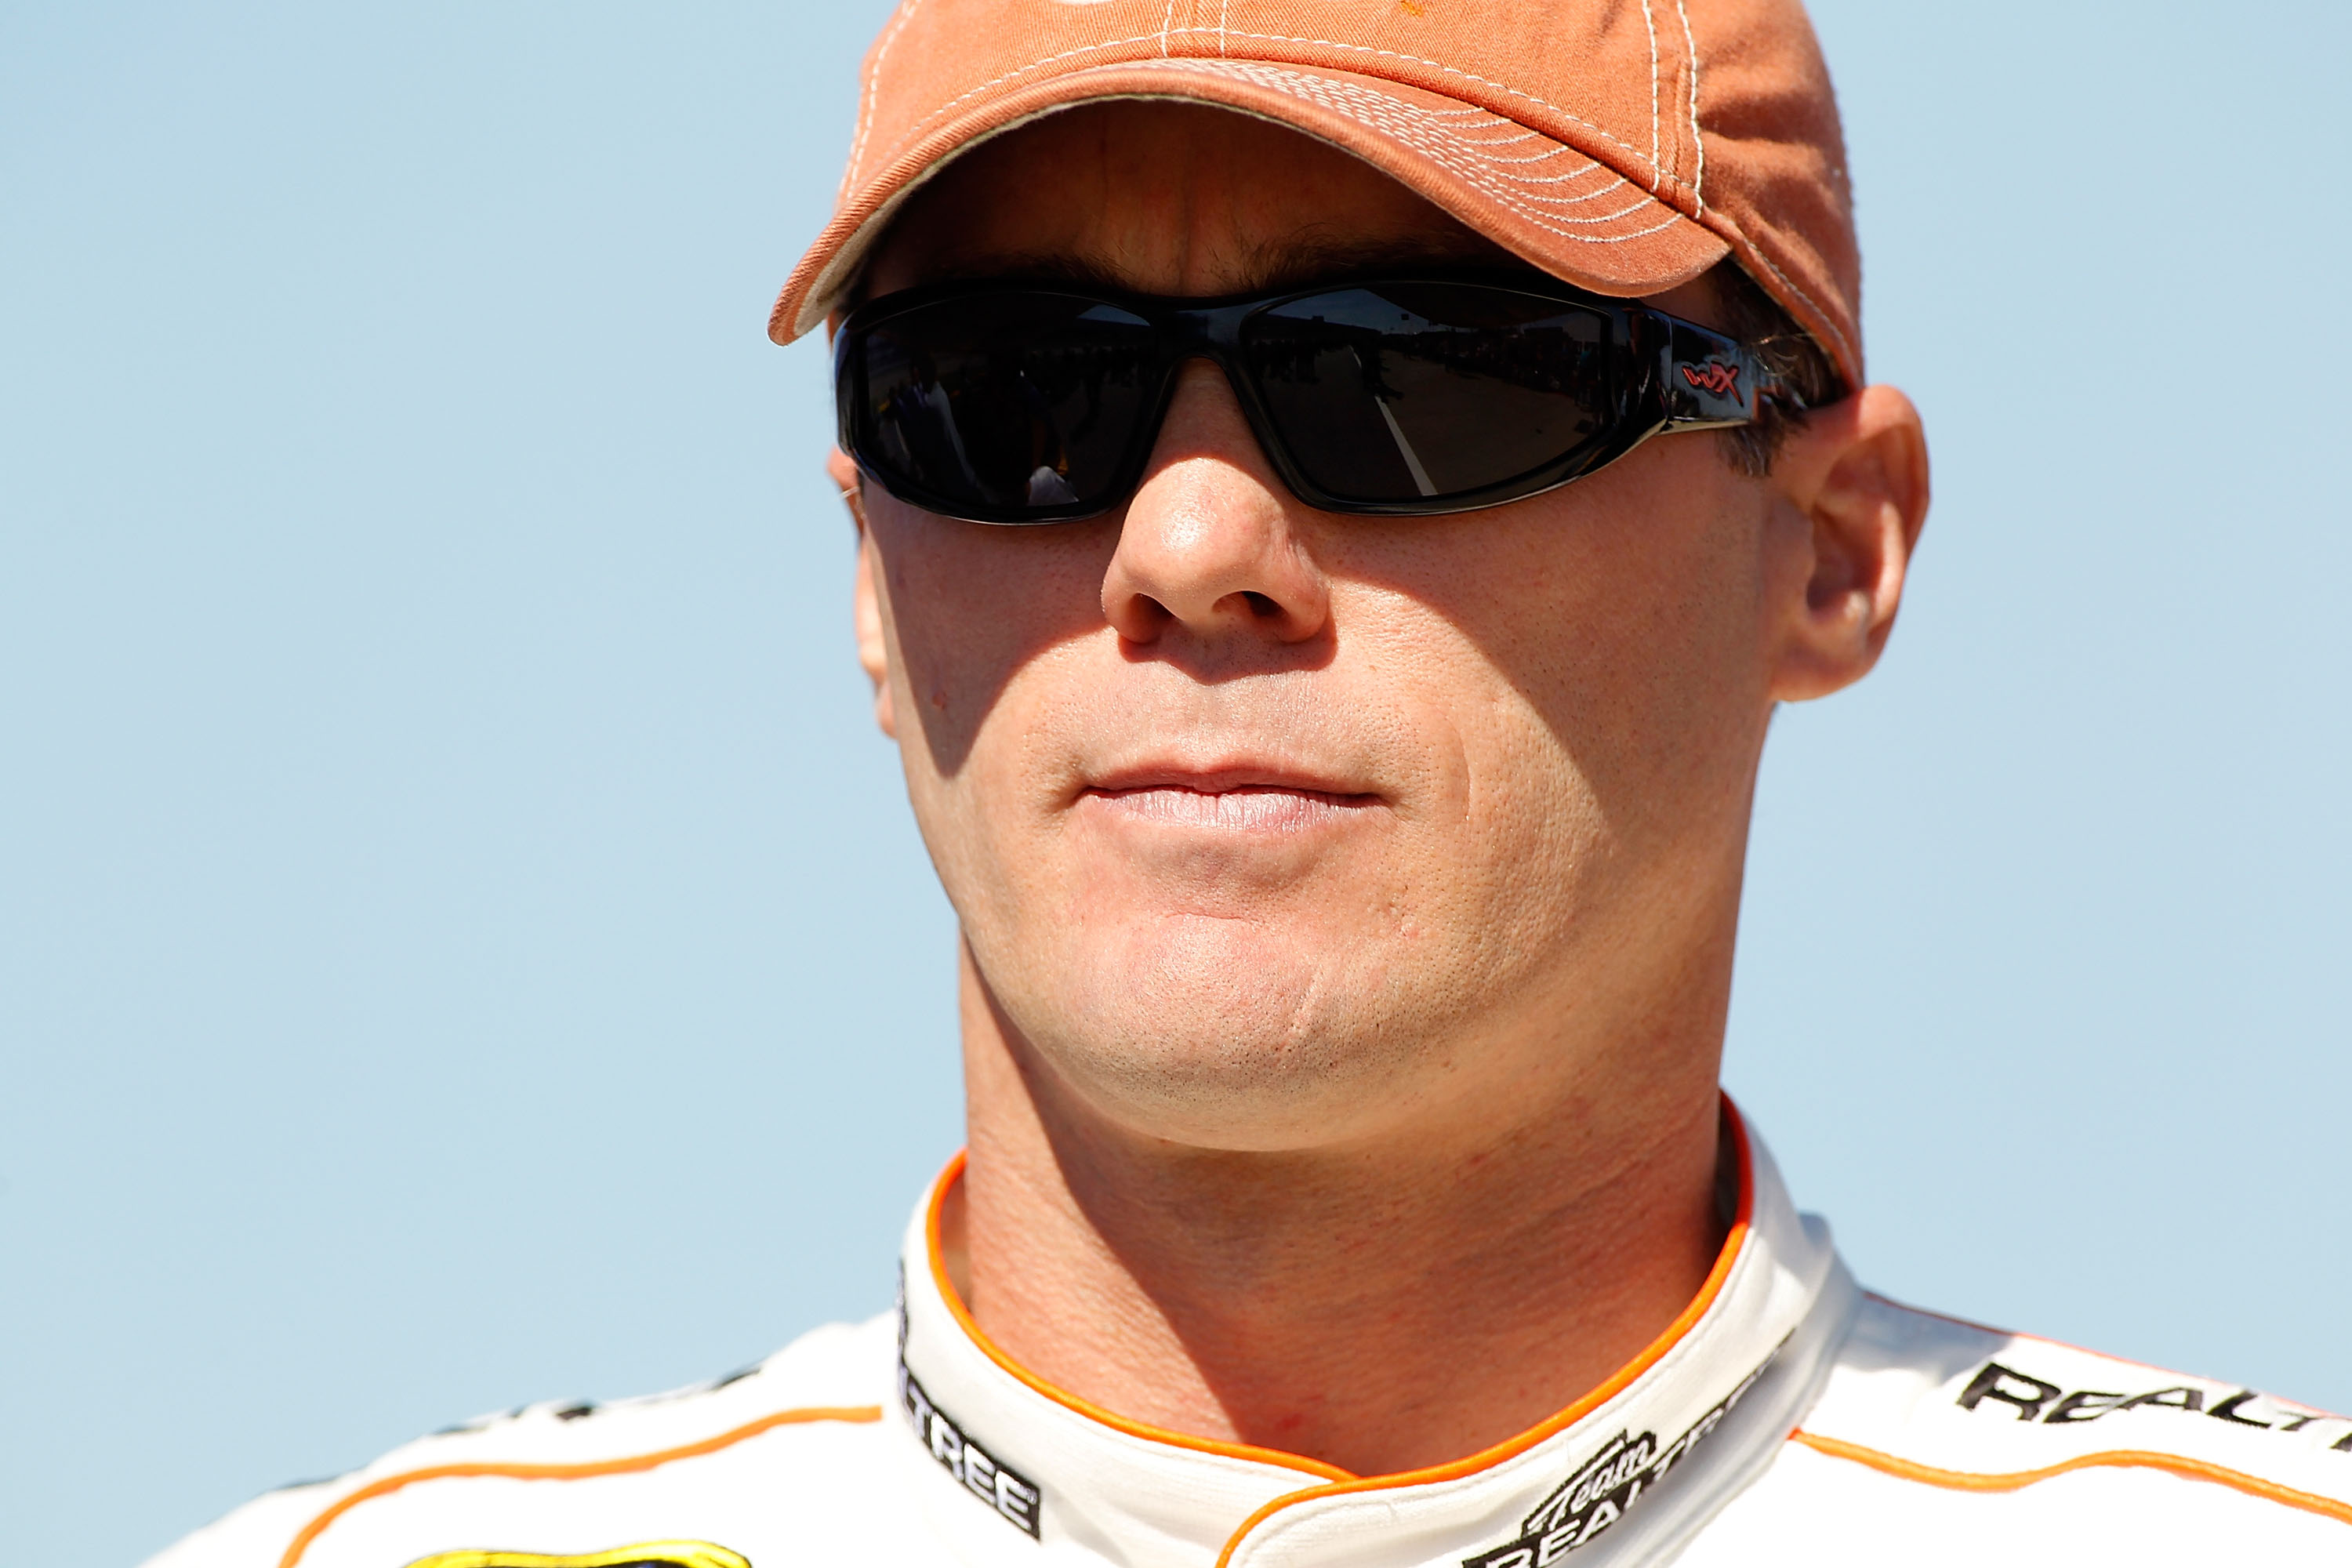 TALLADEGA, AL - OCTOBER 30:  Kevin Harvick, driver of the #29 Realtree/Shell/Pennzoil Chevrolet, walks on pit road during qualifying for the NASCAR Sprint Cup Series AMP Energy Juice 500 at Talladega Superspeedway on October 30, 2010 in Talladega, Alabama